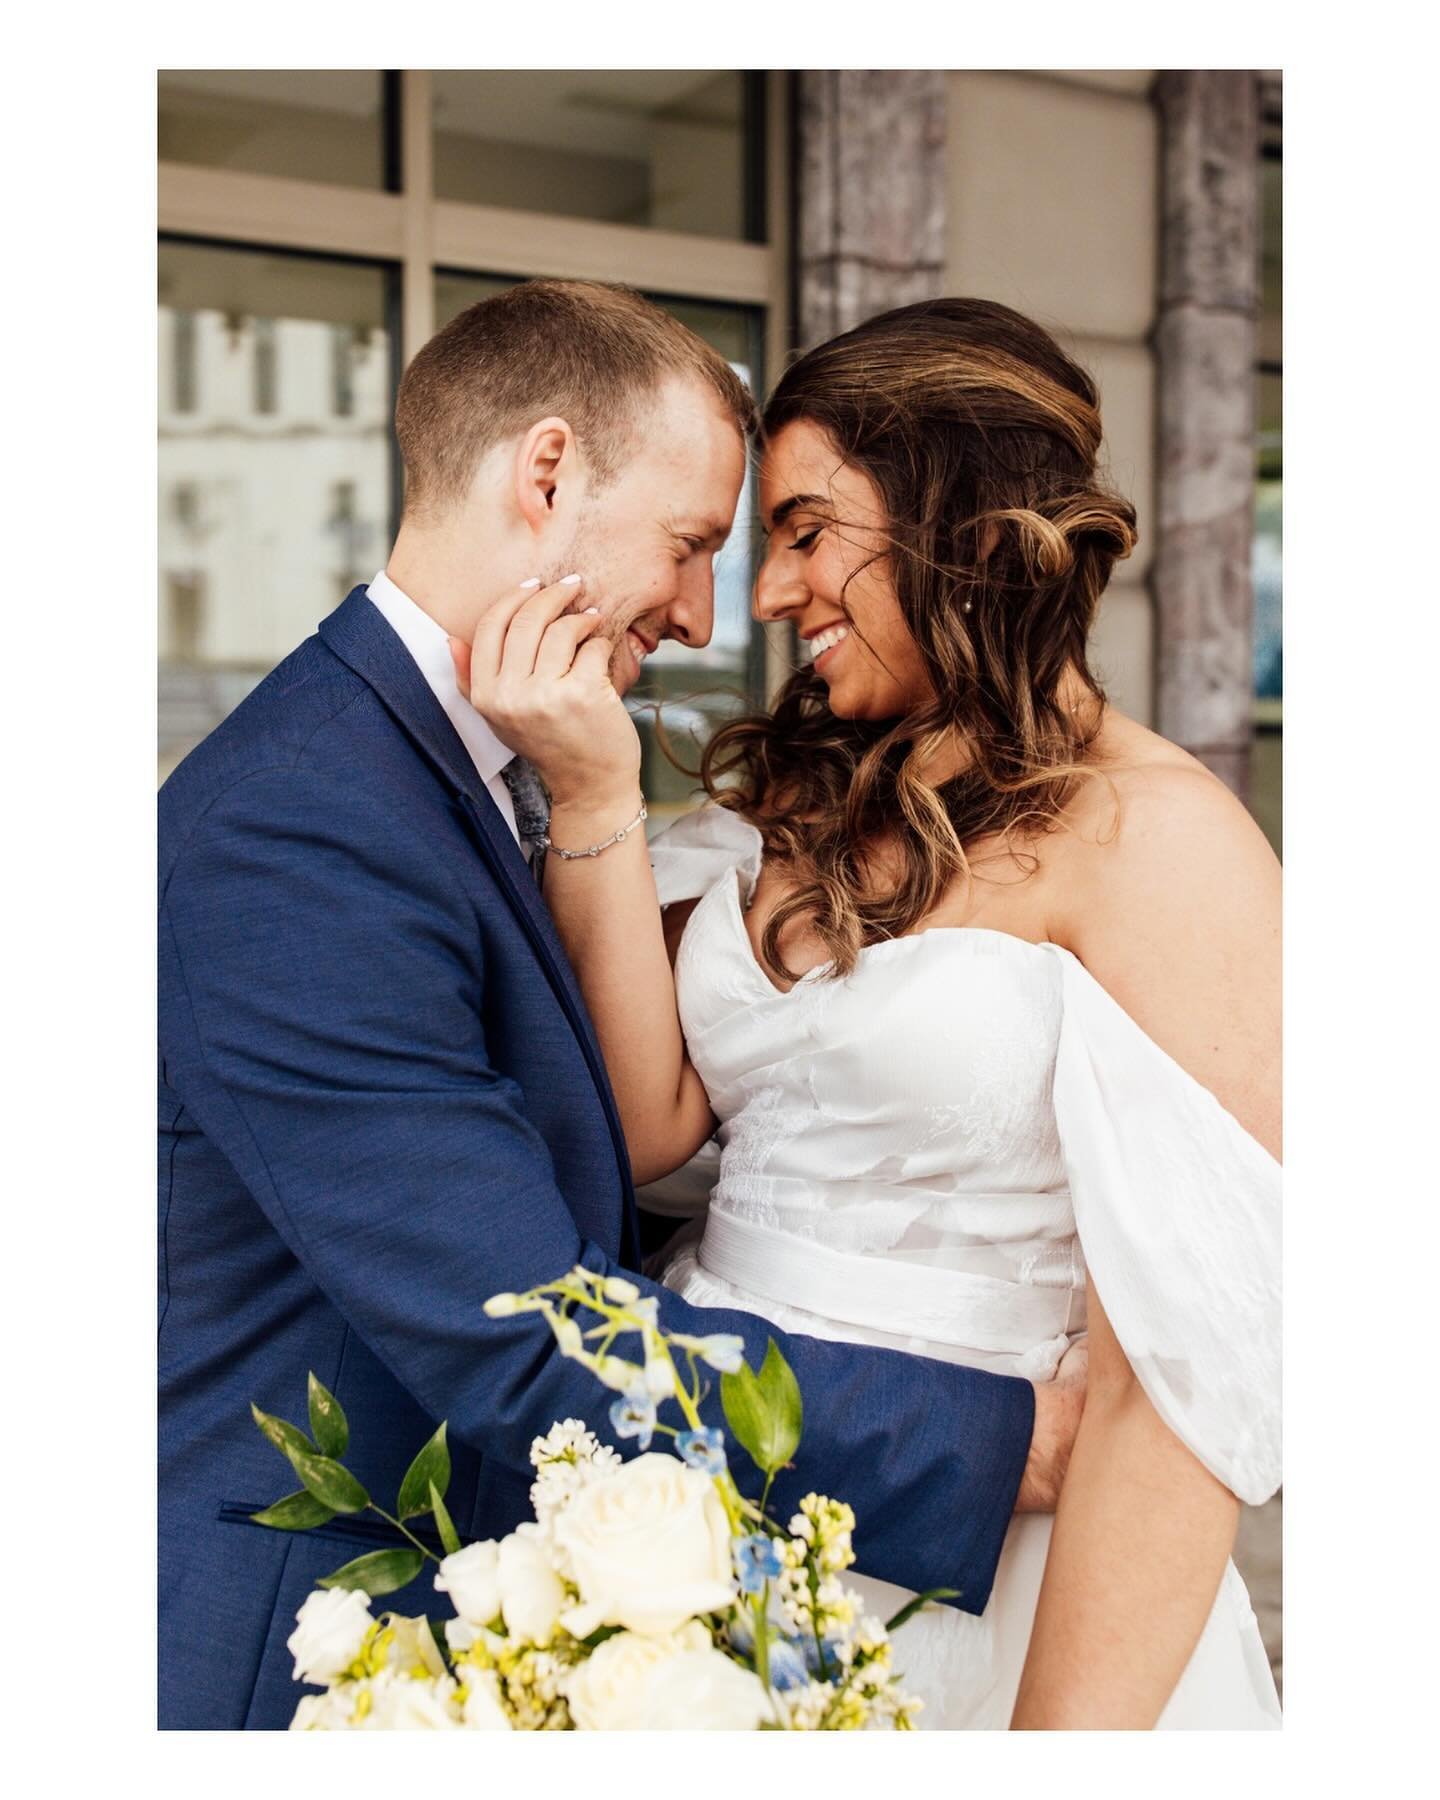 First wedding of the year in the books with Emily &amp; Matt 💖

Hotel: @westinbookcadillac 
Venue: @thewhiskeyfactory 
Hair &amp; Makeup : @themakeuploft 
Florist: @flowersfordreamsdetroit 
Dress: @sergejevaguine @romasposa